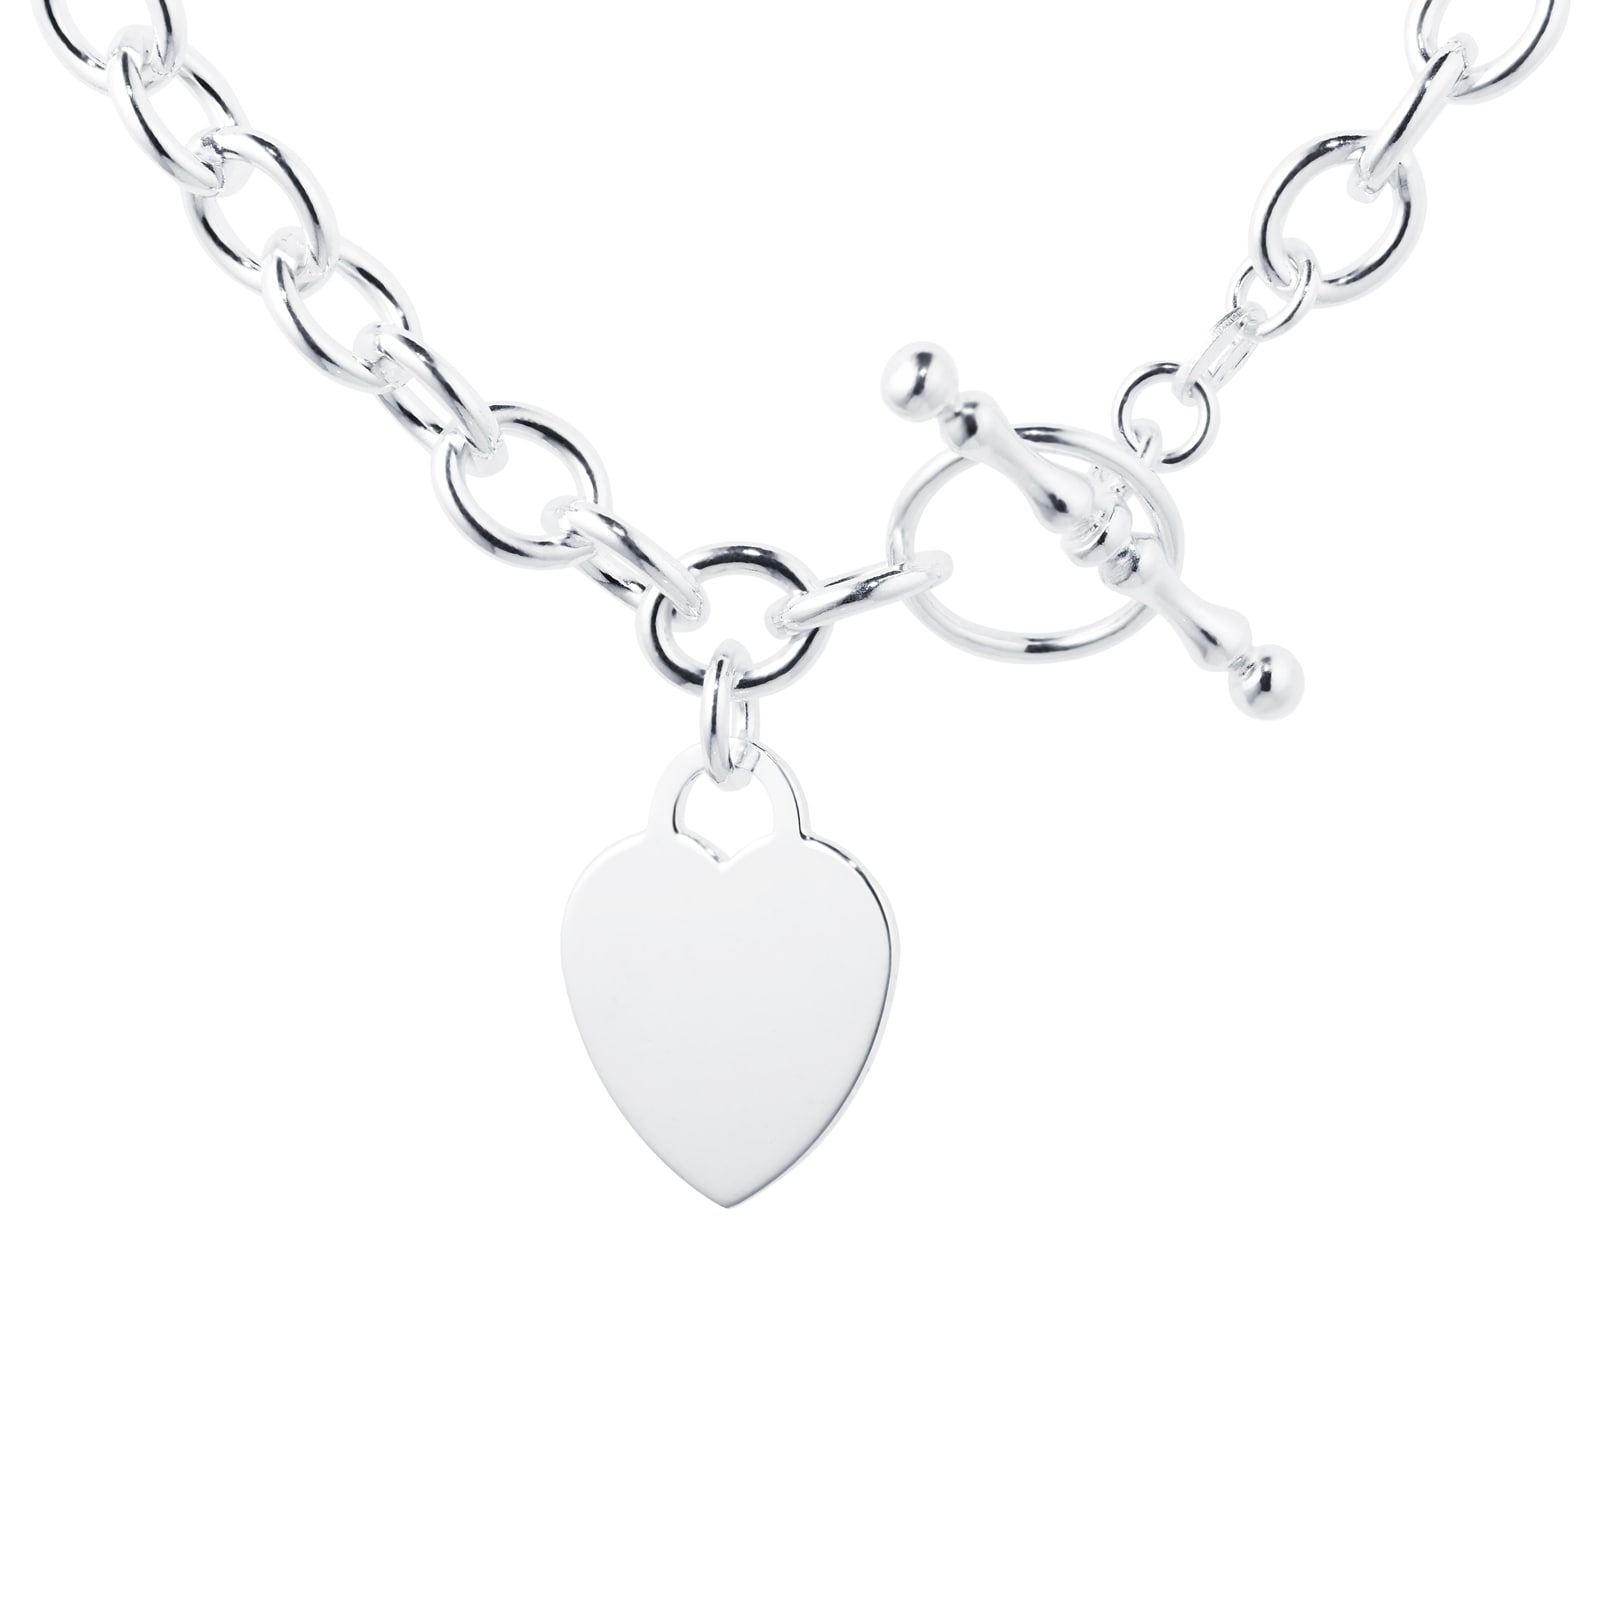 Silver Plated T-Bar & Heart Necklace by Peace of Mind - hillyhorton.co.uk